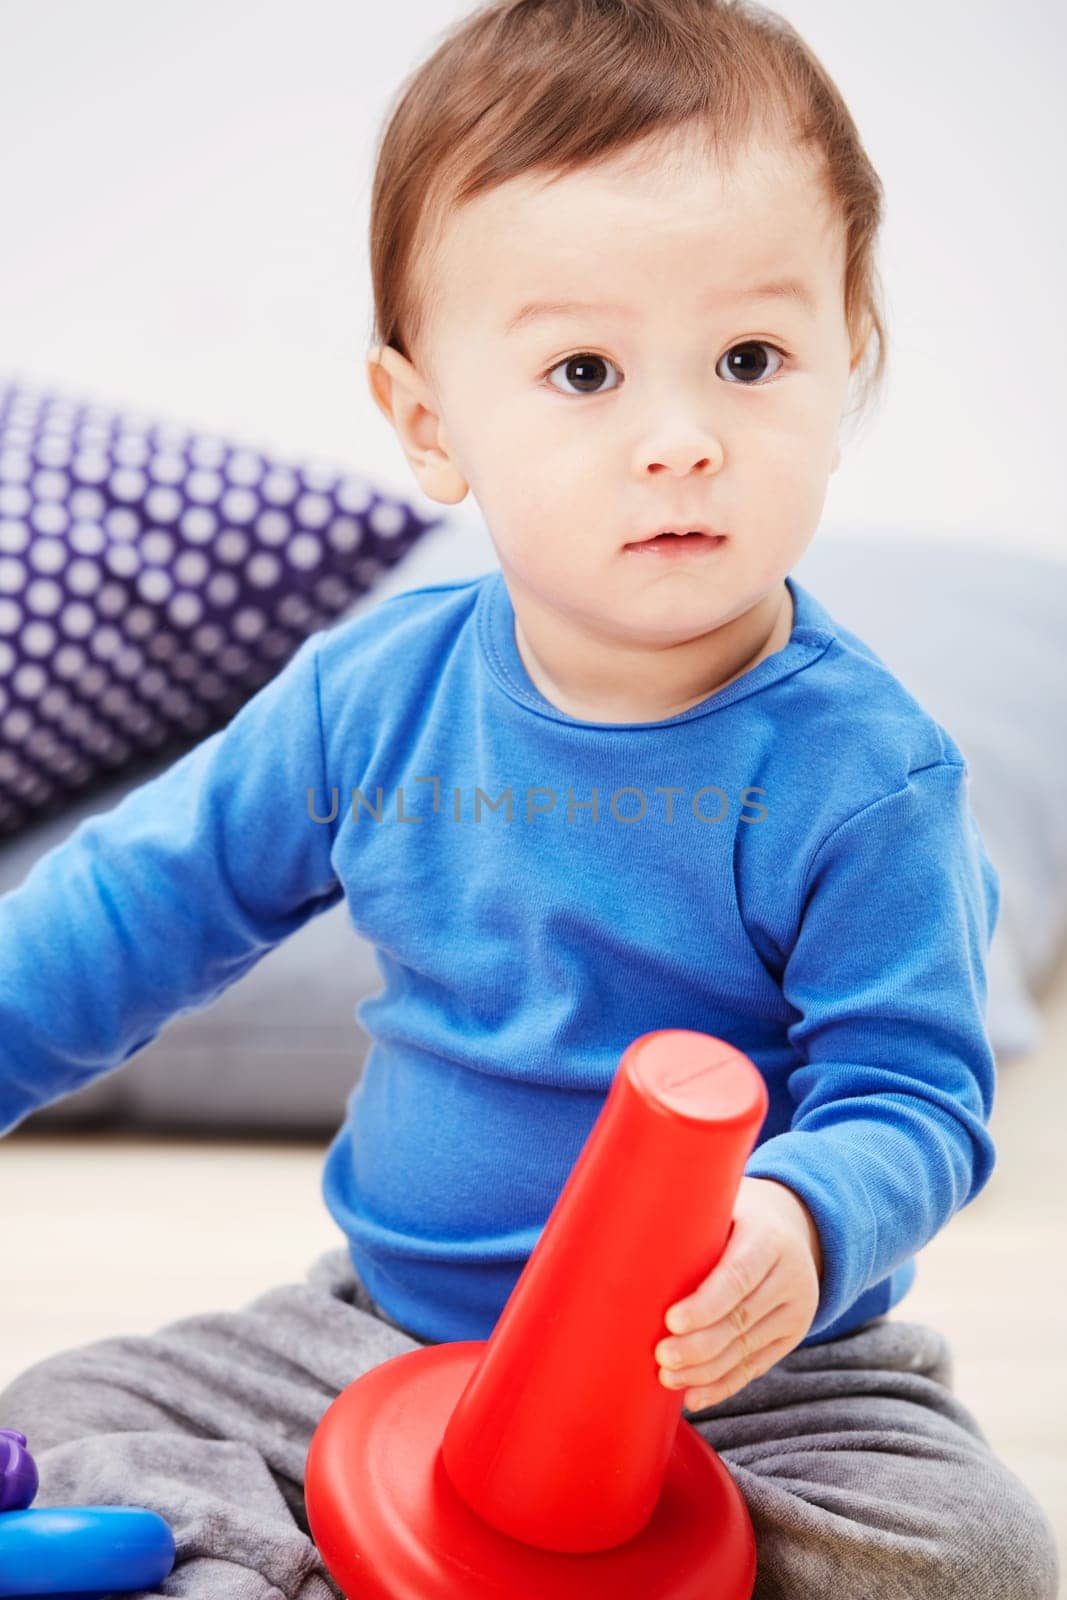 Baby, toys and playing on carpet in home or development, learning or education. Boy, kid and floor for game in lounge or puzzle progress or cognitive interest for coordination, support or sensory fun.